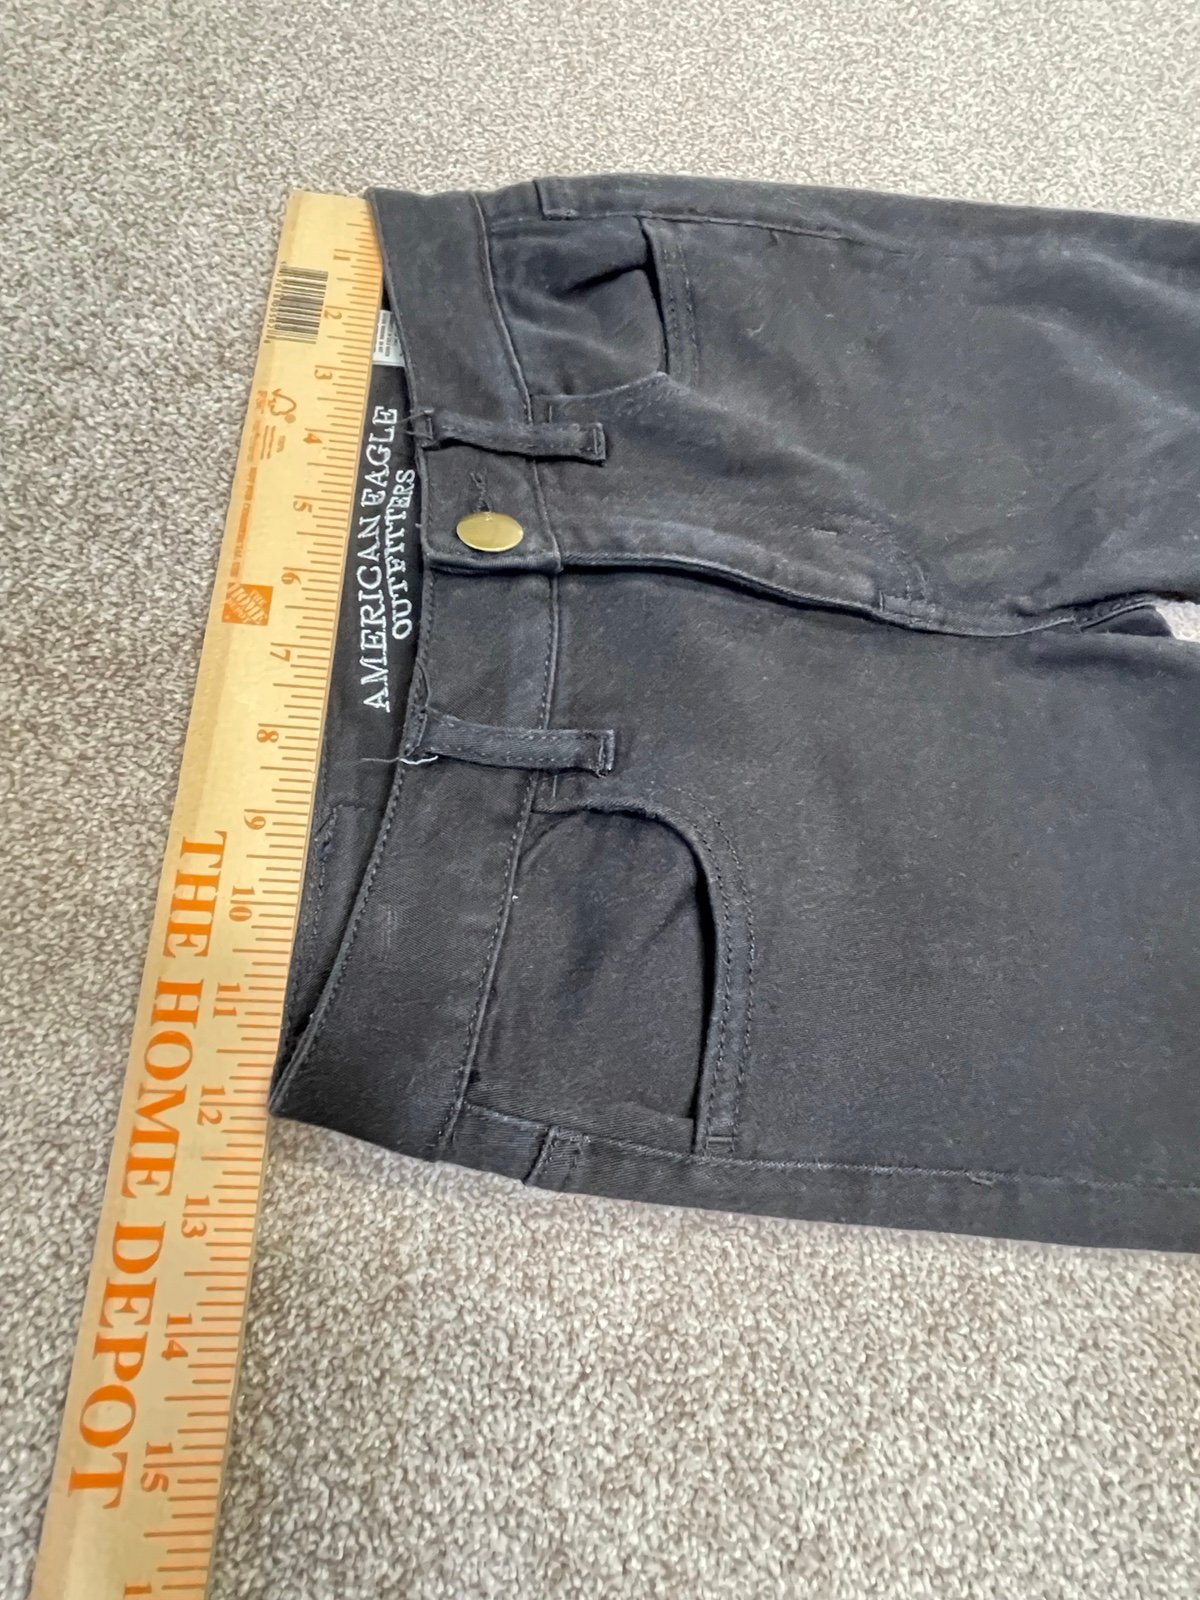 cheapest place to buy  American Eagle womens hi rise jegging jeans sz 0 extra Long black stretch denim mpUawUhOn Cheap